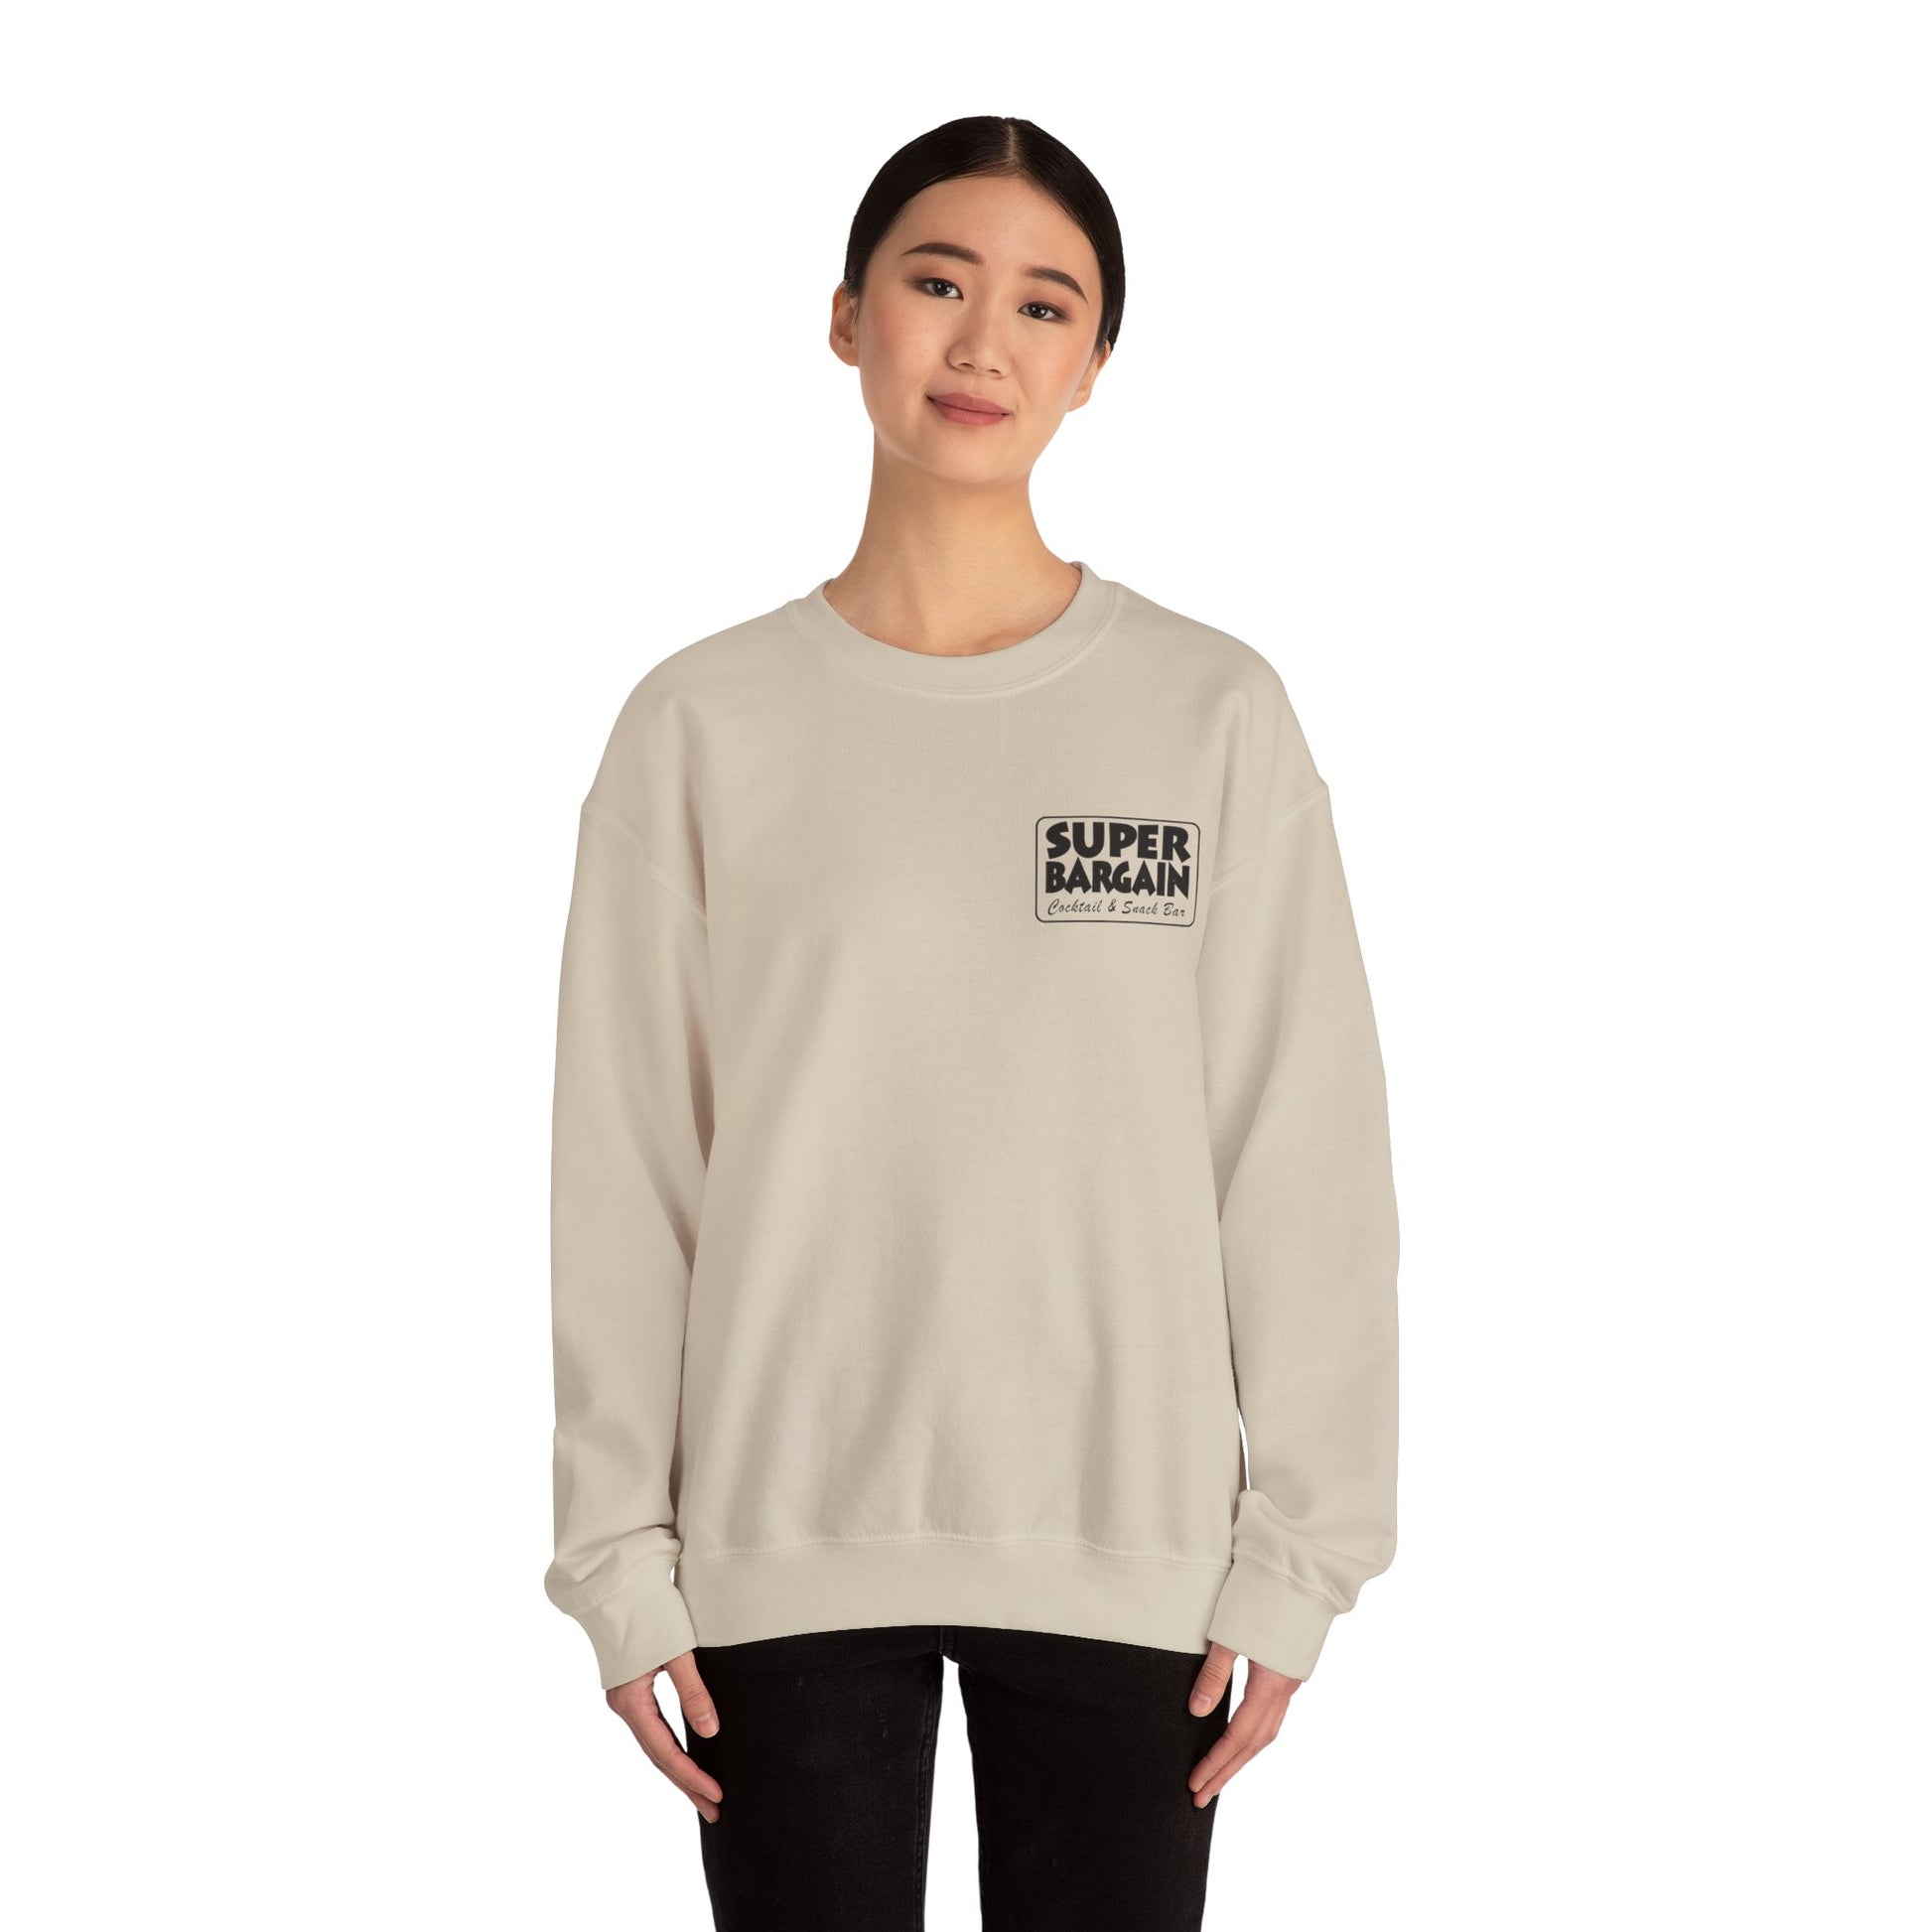 A young woman wearing a beige Unisex Heavy Blend™ Crewneck Monochrome Logo Sweatshirt from Printify stands against a plain background in Cabbagetown, Toronto, looking directly at the camera with a neutral expression.